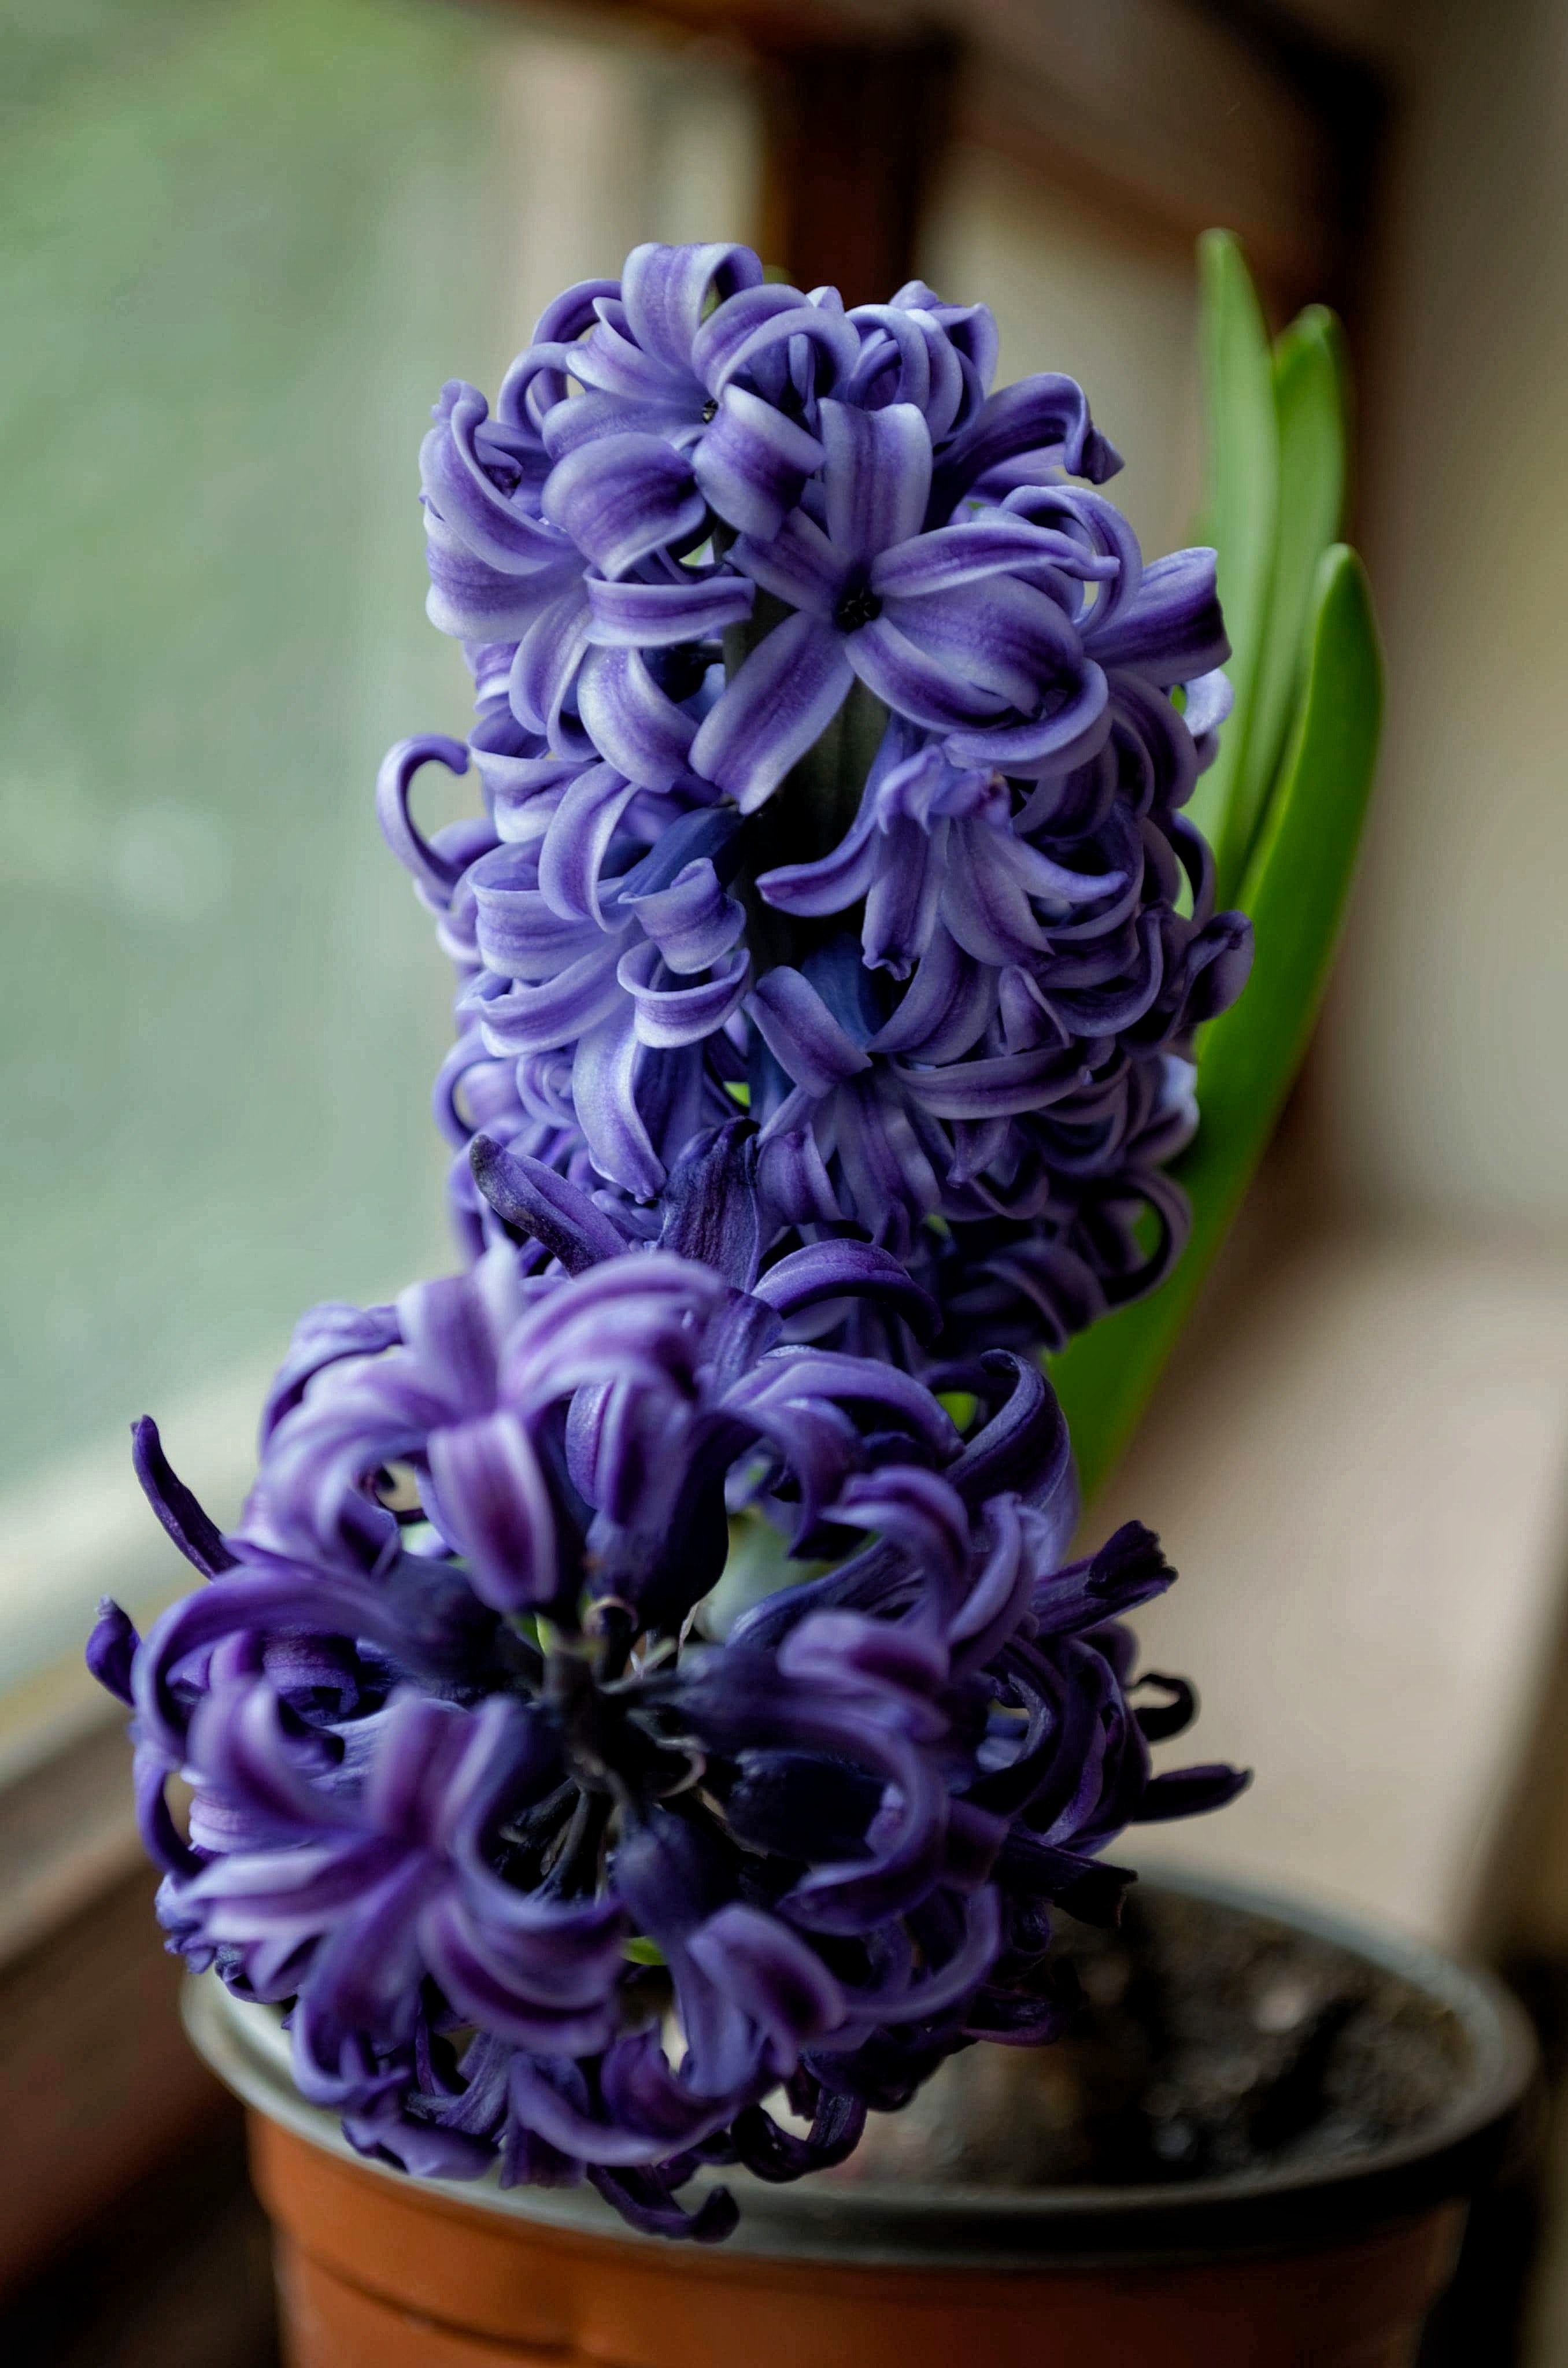 Selective Focus Photography of Purple Hyacinth Flower · Free Stock